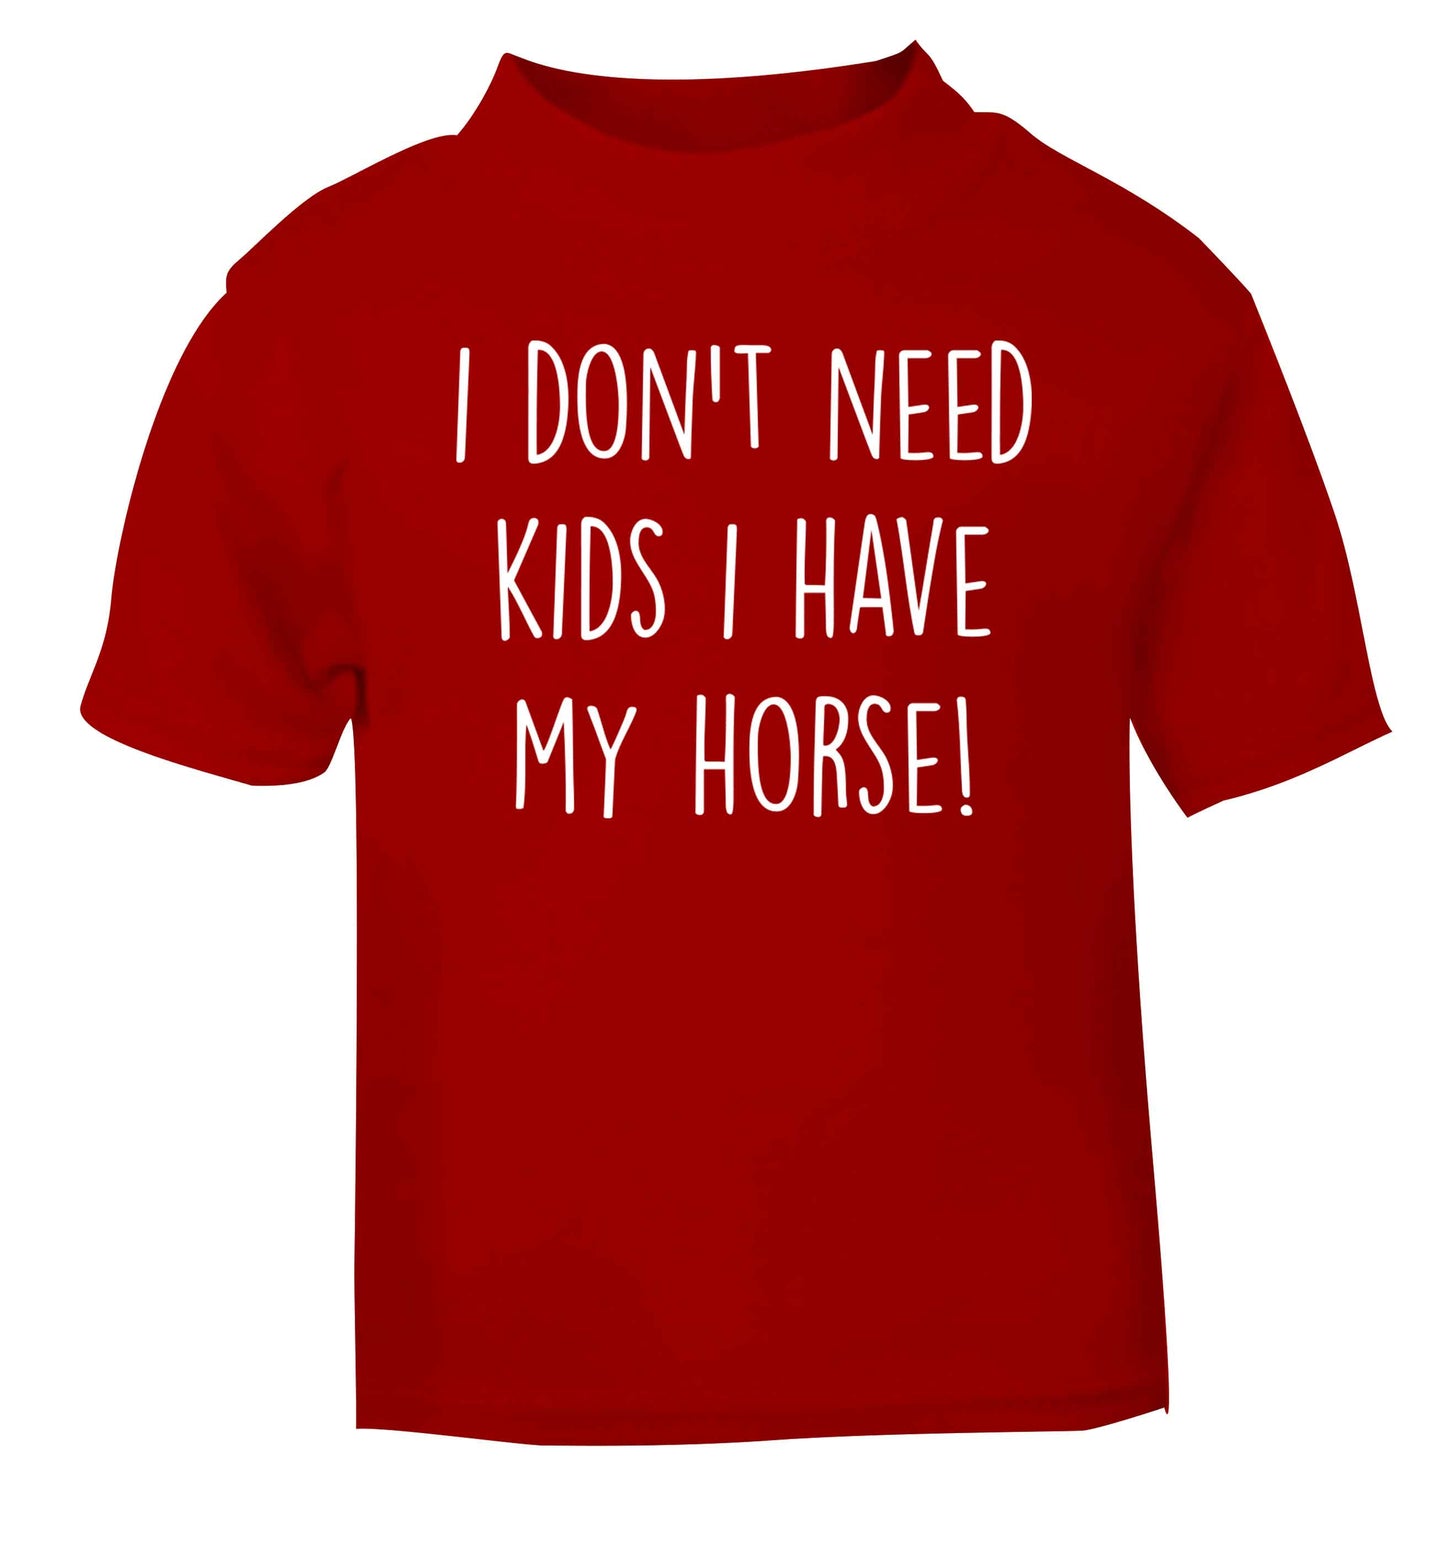 I don't need kids I have my horse red baby toddler Tshirt 2 Years